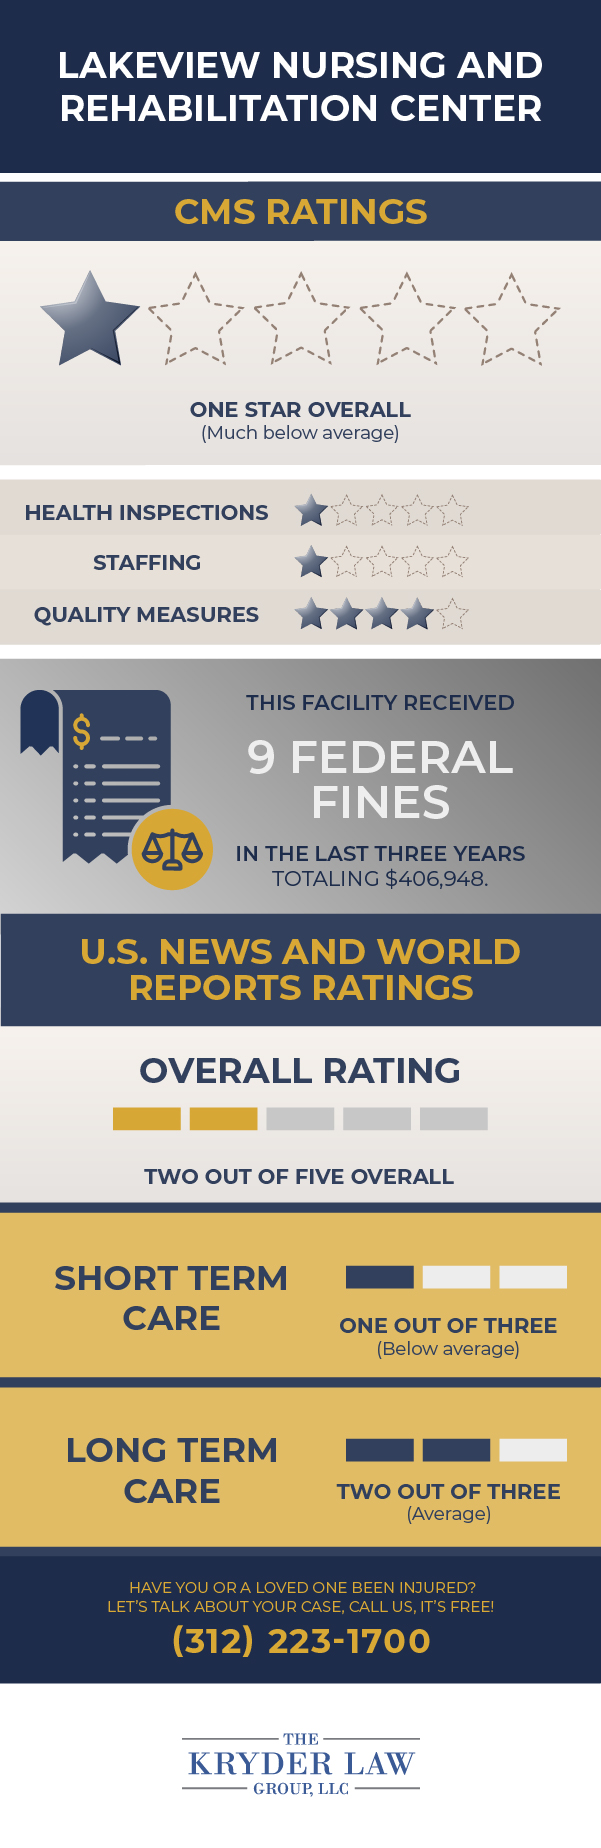 Lakeview Rehabilitation & Nursing Center CMS Ratings and U.S. News & World Reports Ratings